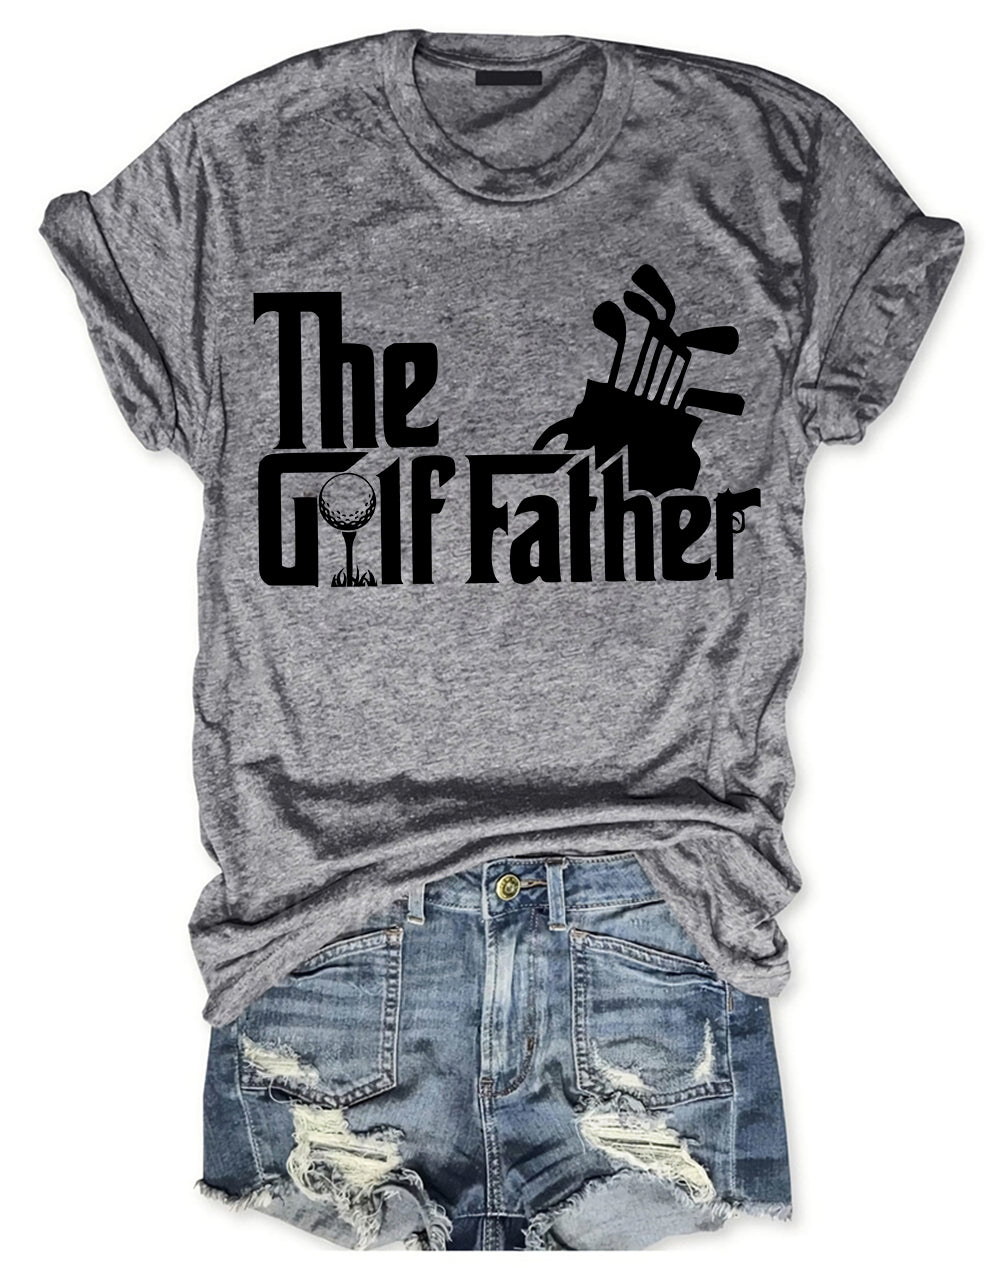 The Golf Father T-shirt